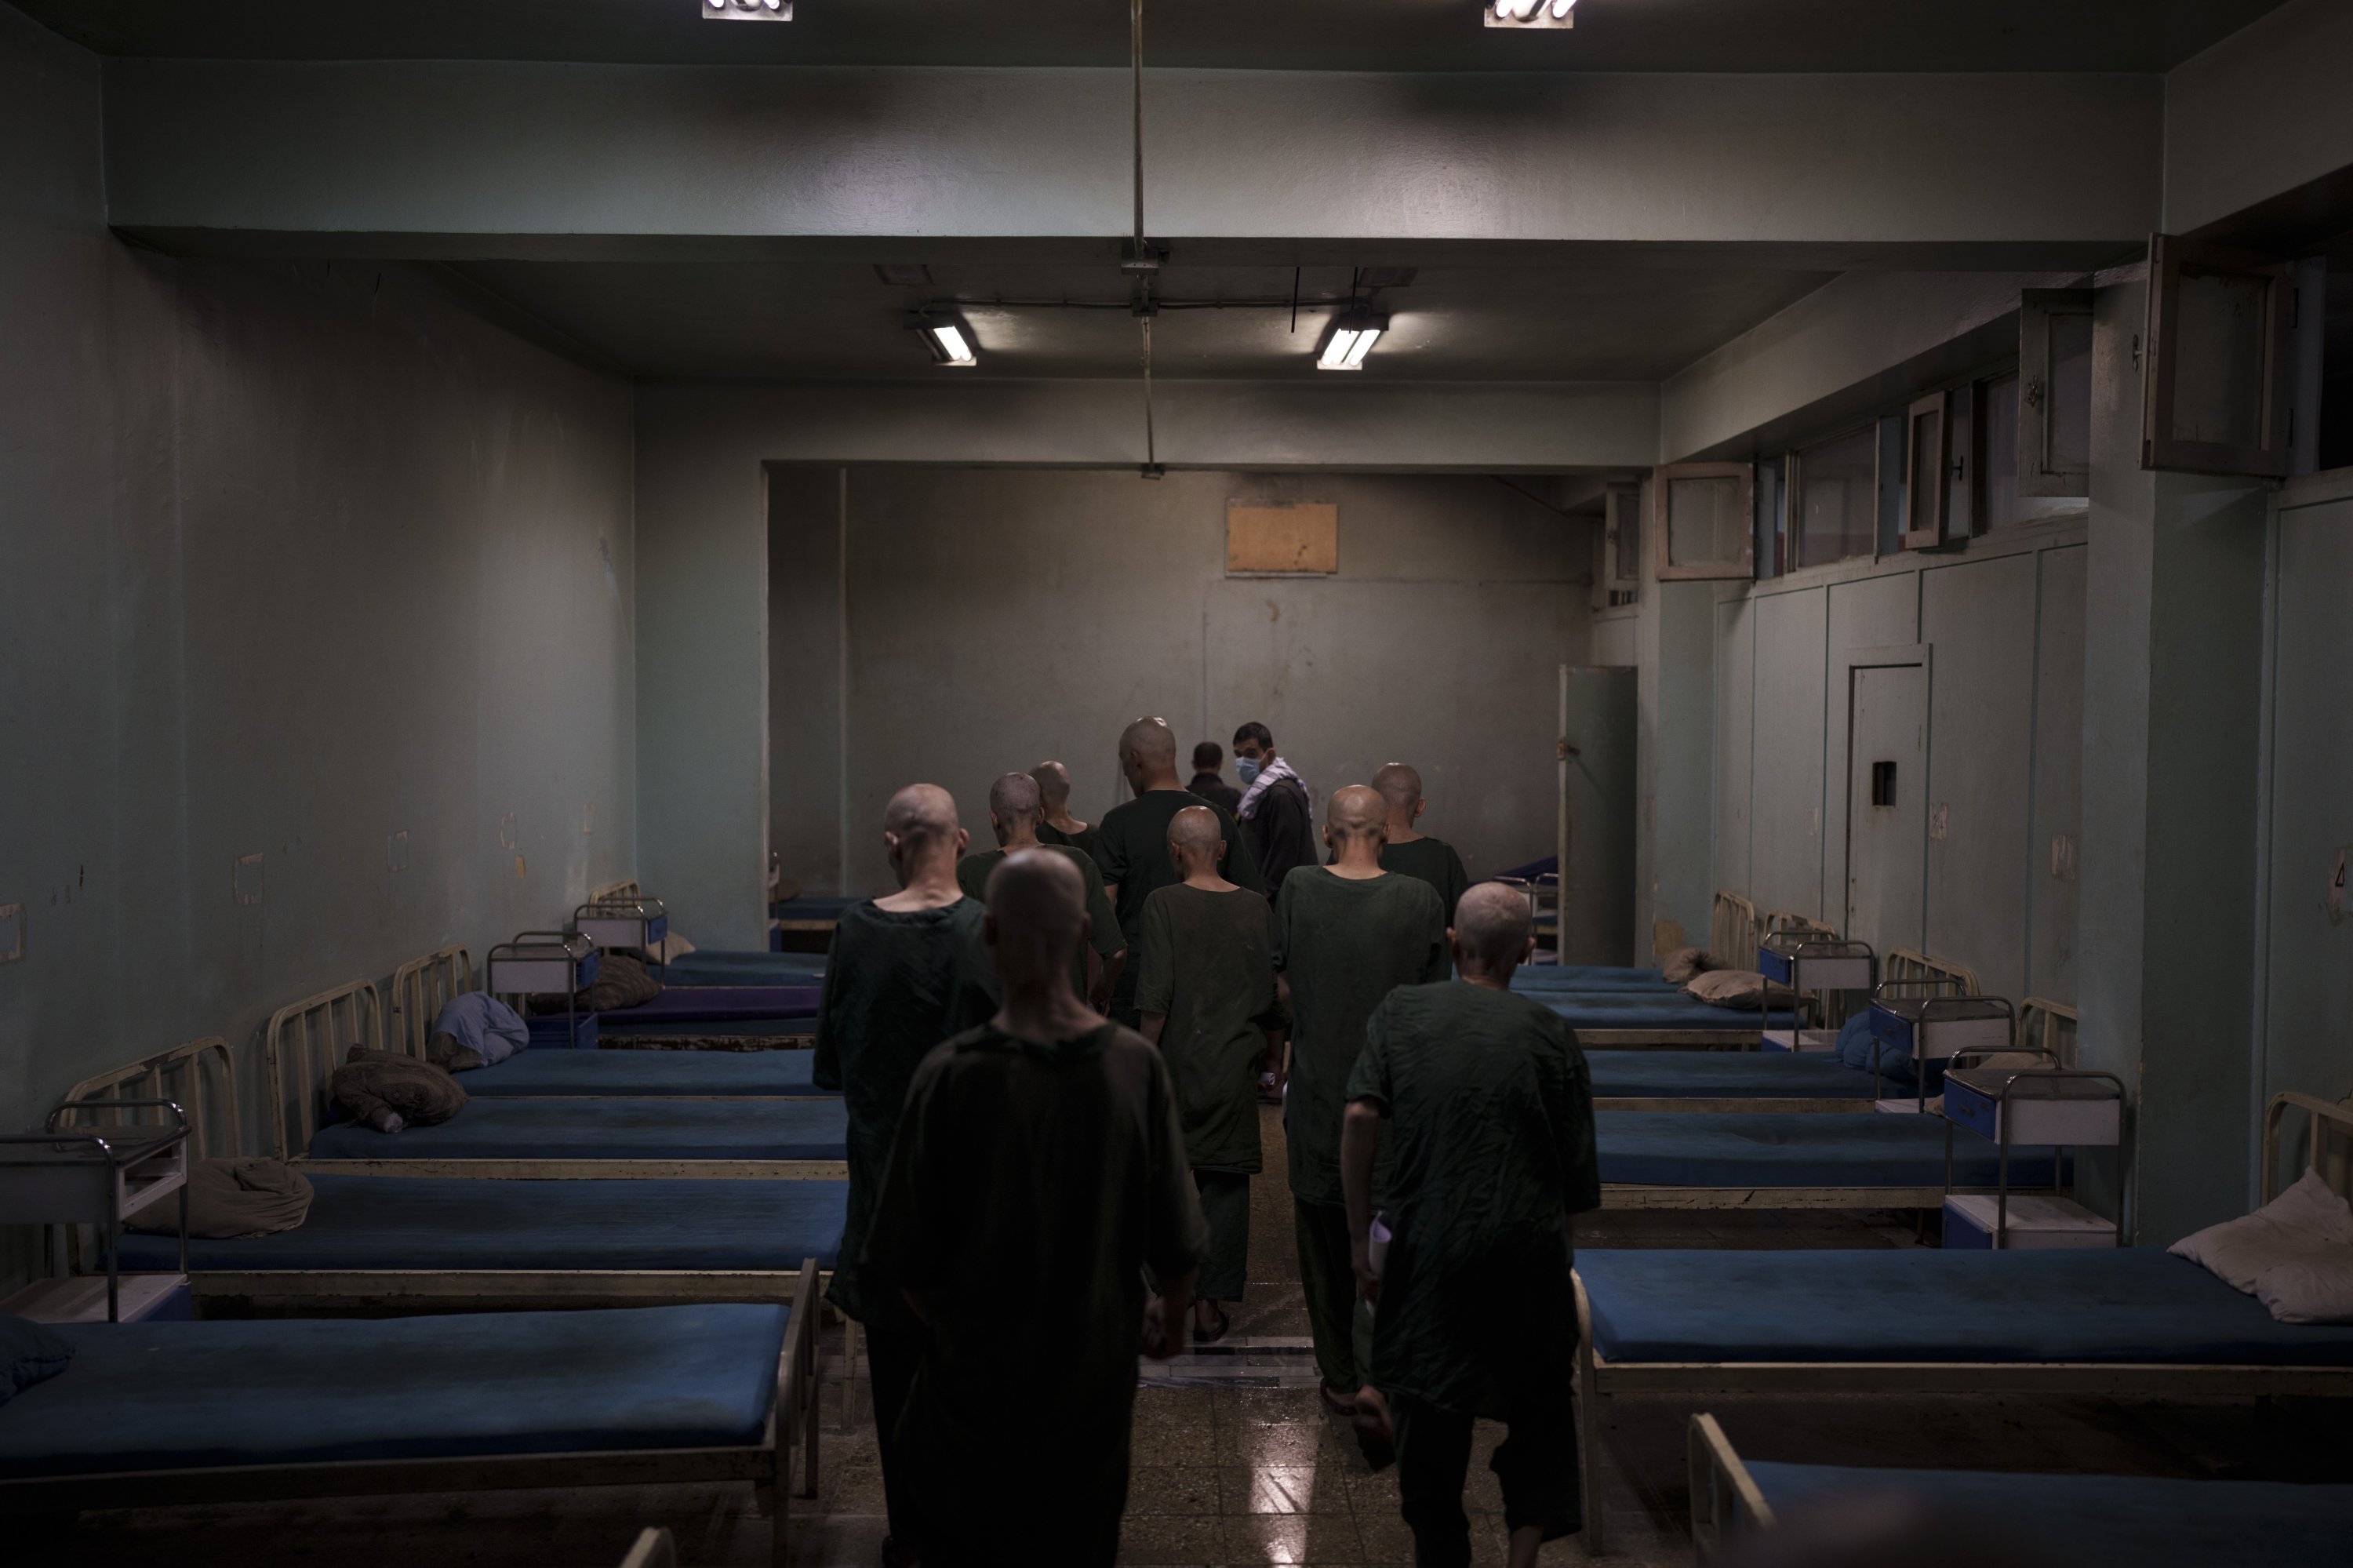 Drug users detained during a Taliban raid are taken to their room at the detoxification ward of the Avicenna Medical Hospital for Drug Treatment in Kabul, Afghanistan, Oct. 2, 2021. (AP Photo)